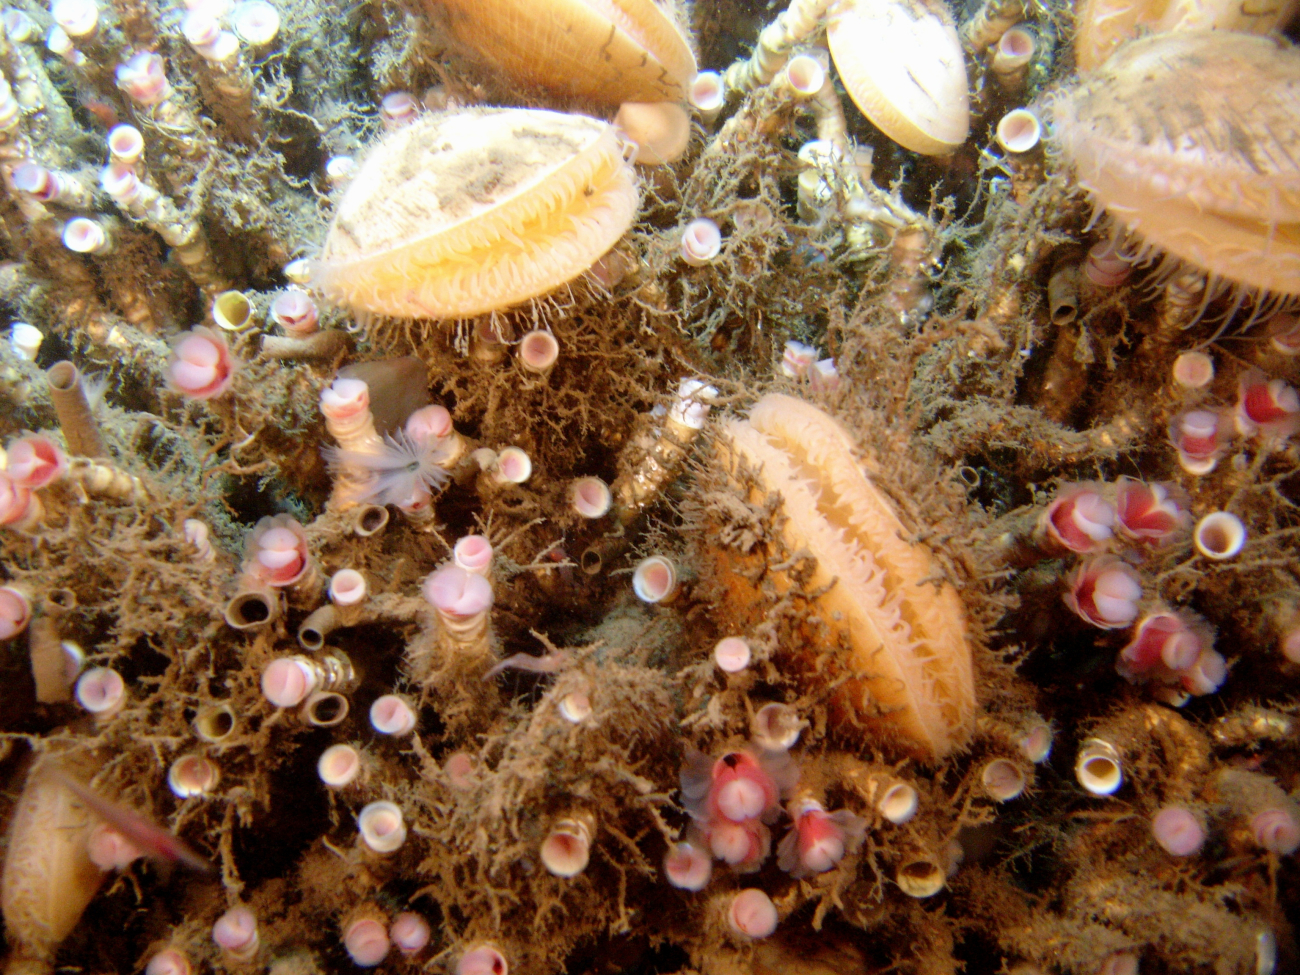 A thicket of lamellibrachian tube worms with associated acesta clams at a coldseep site